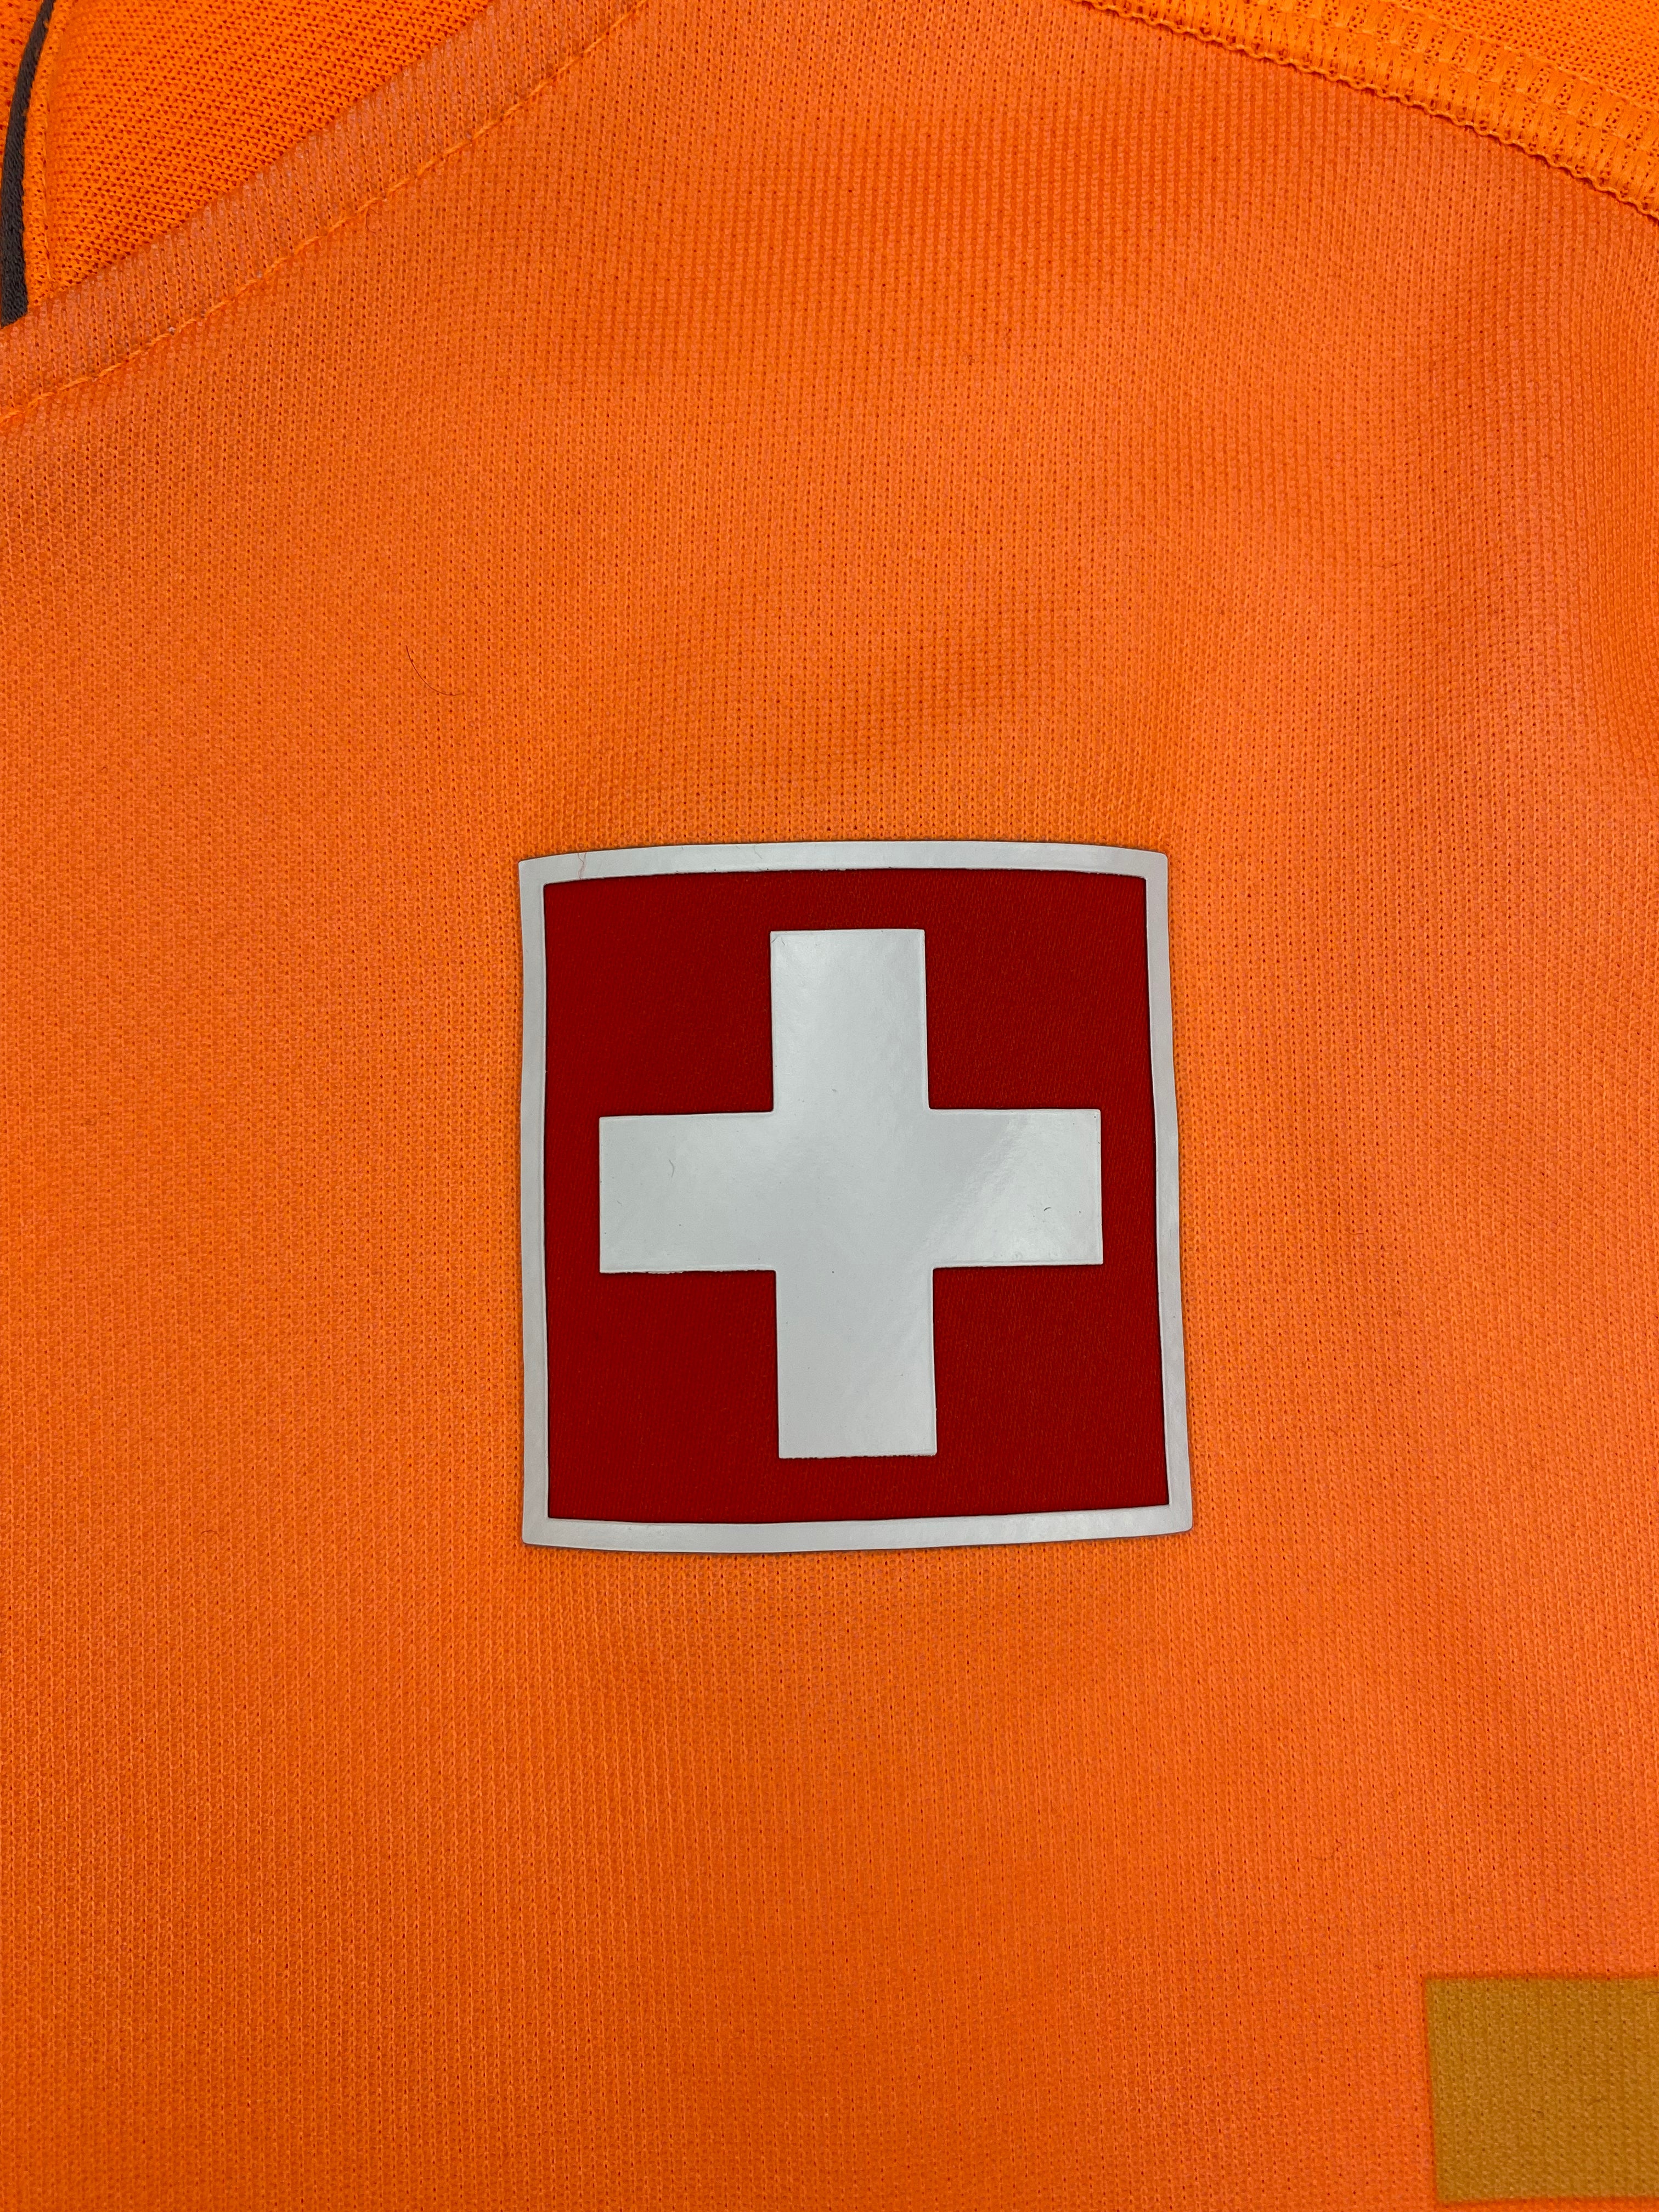 Maillot Suisse GK 2014/15 #1 (XL) 8.5/10